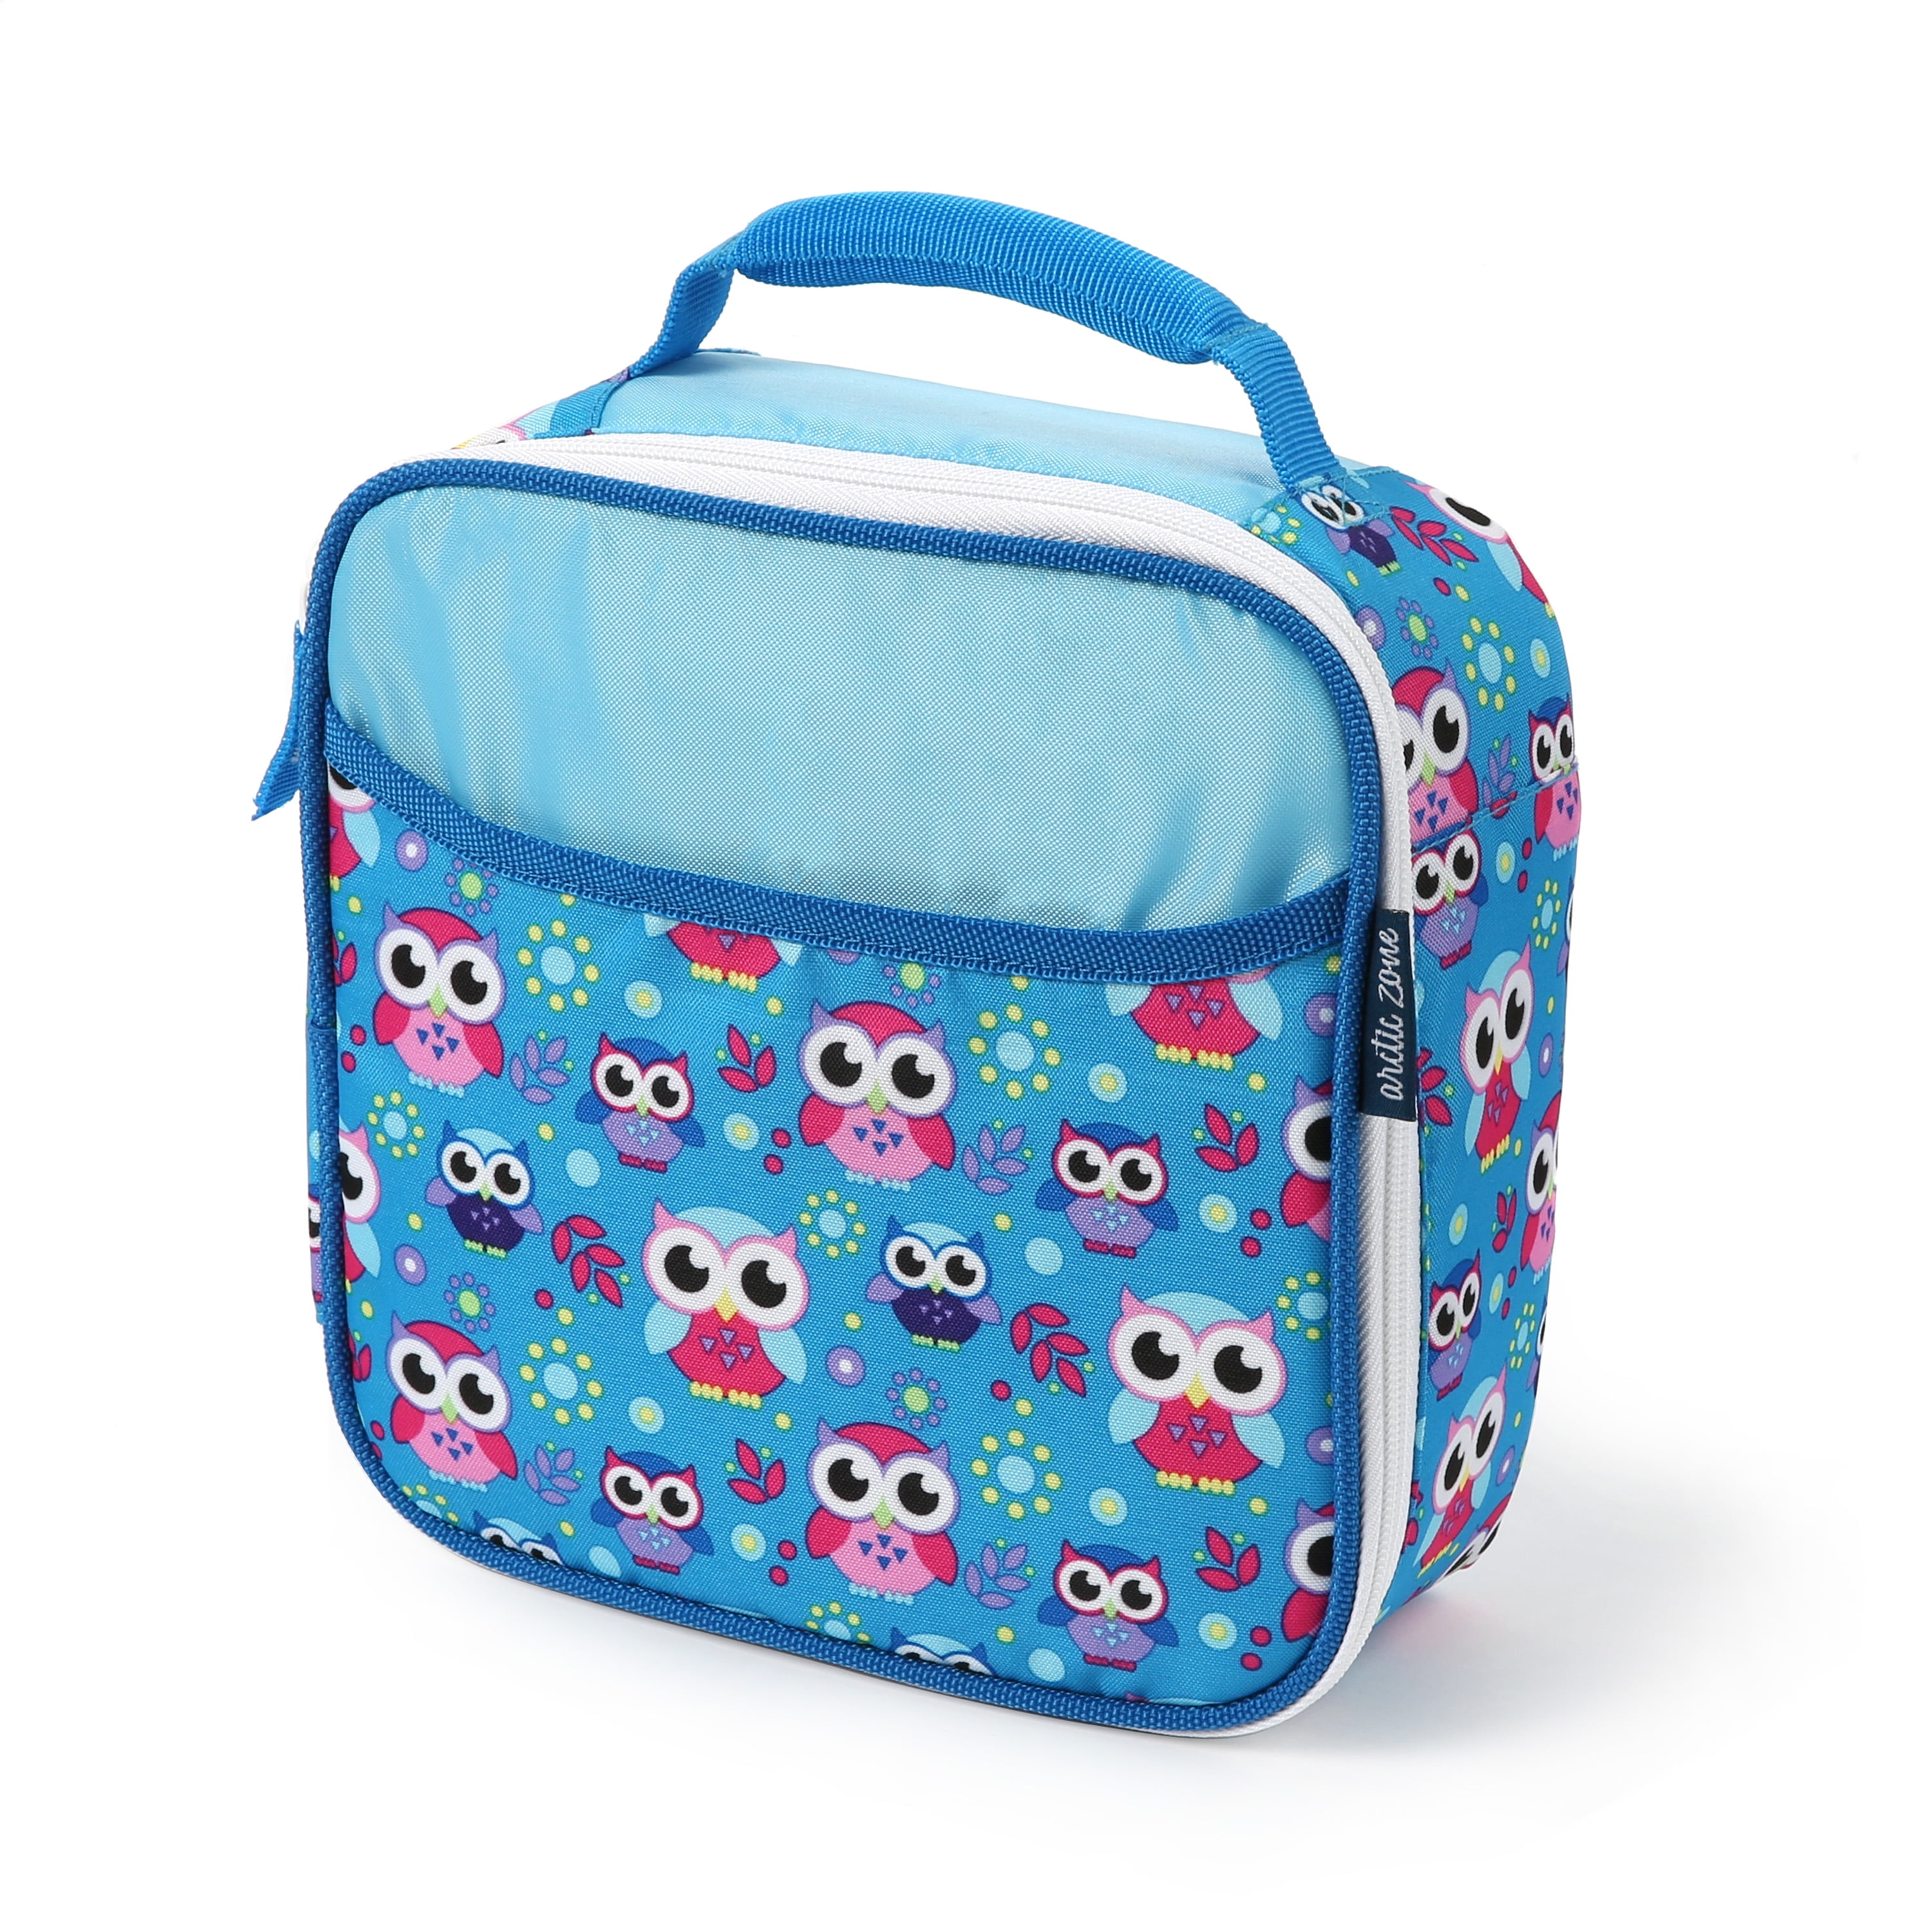 Arctic Zone Lunch Box Combo with Thermal Insulation, Blue 